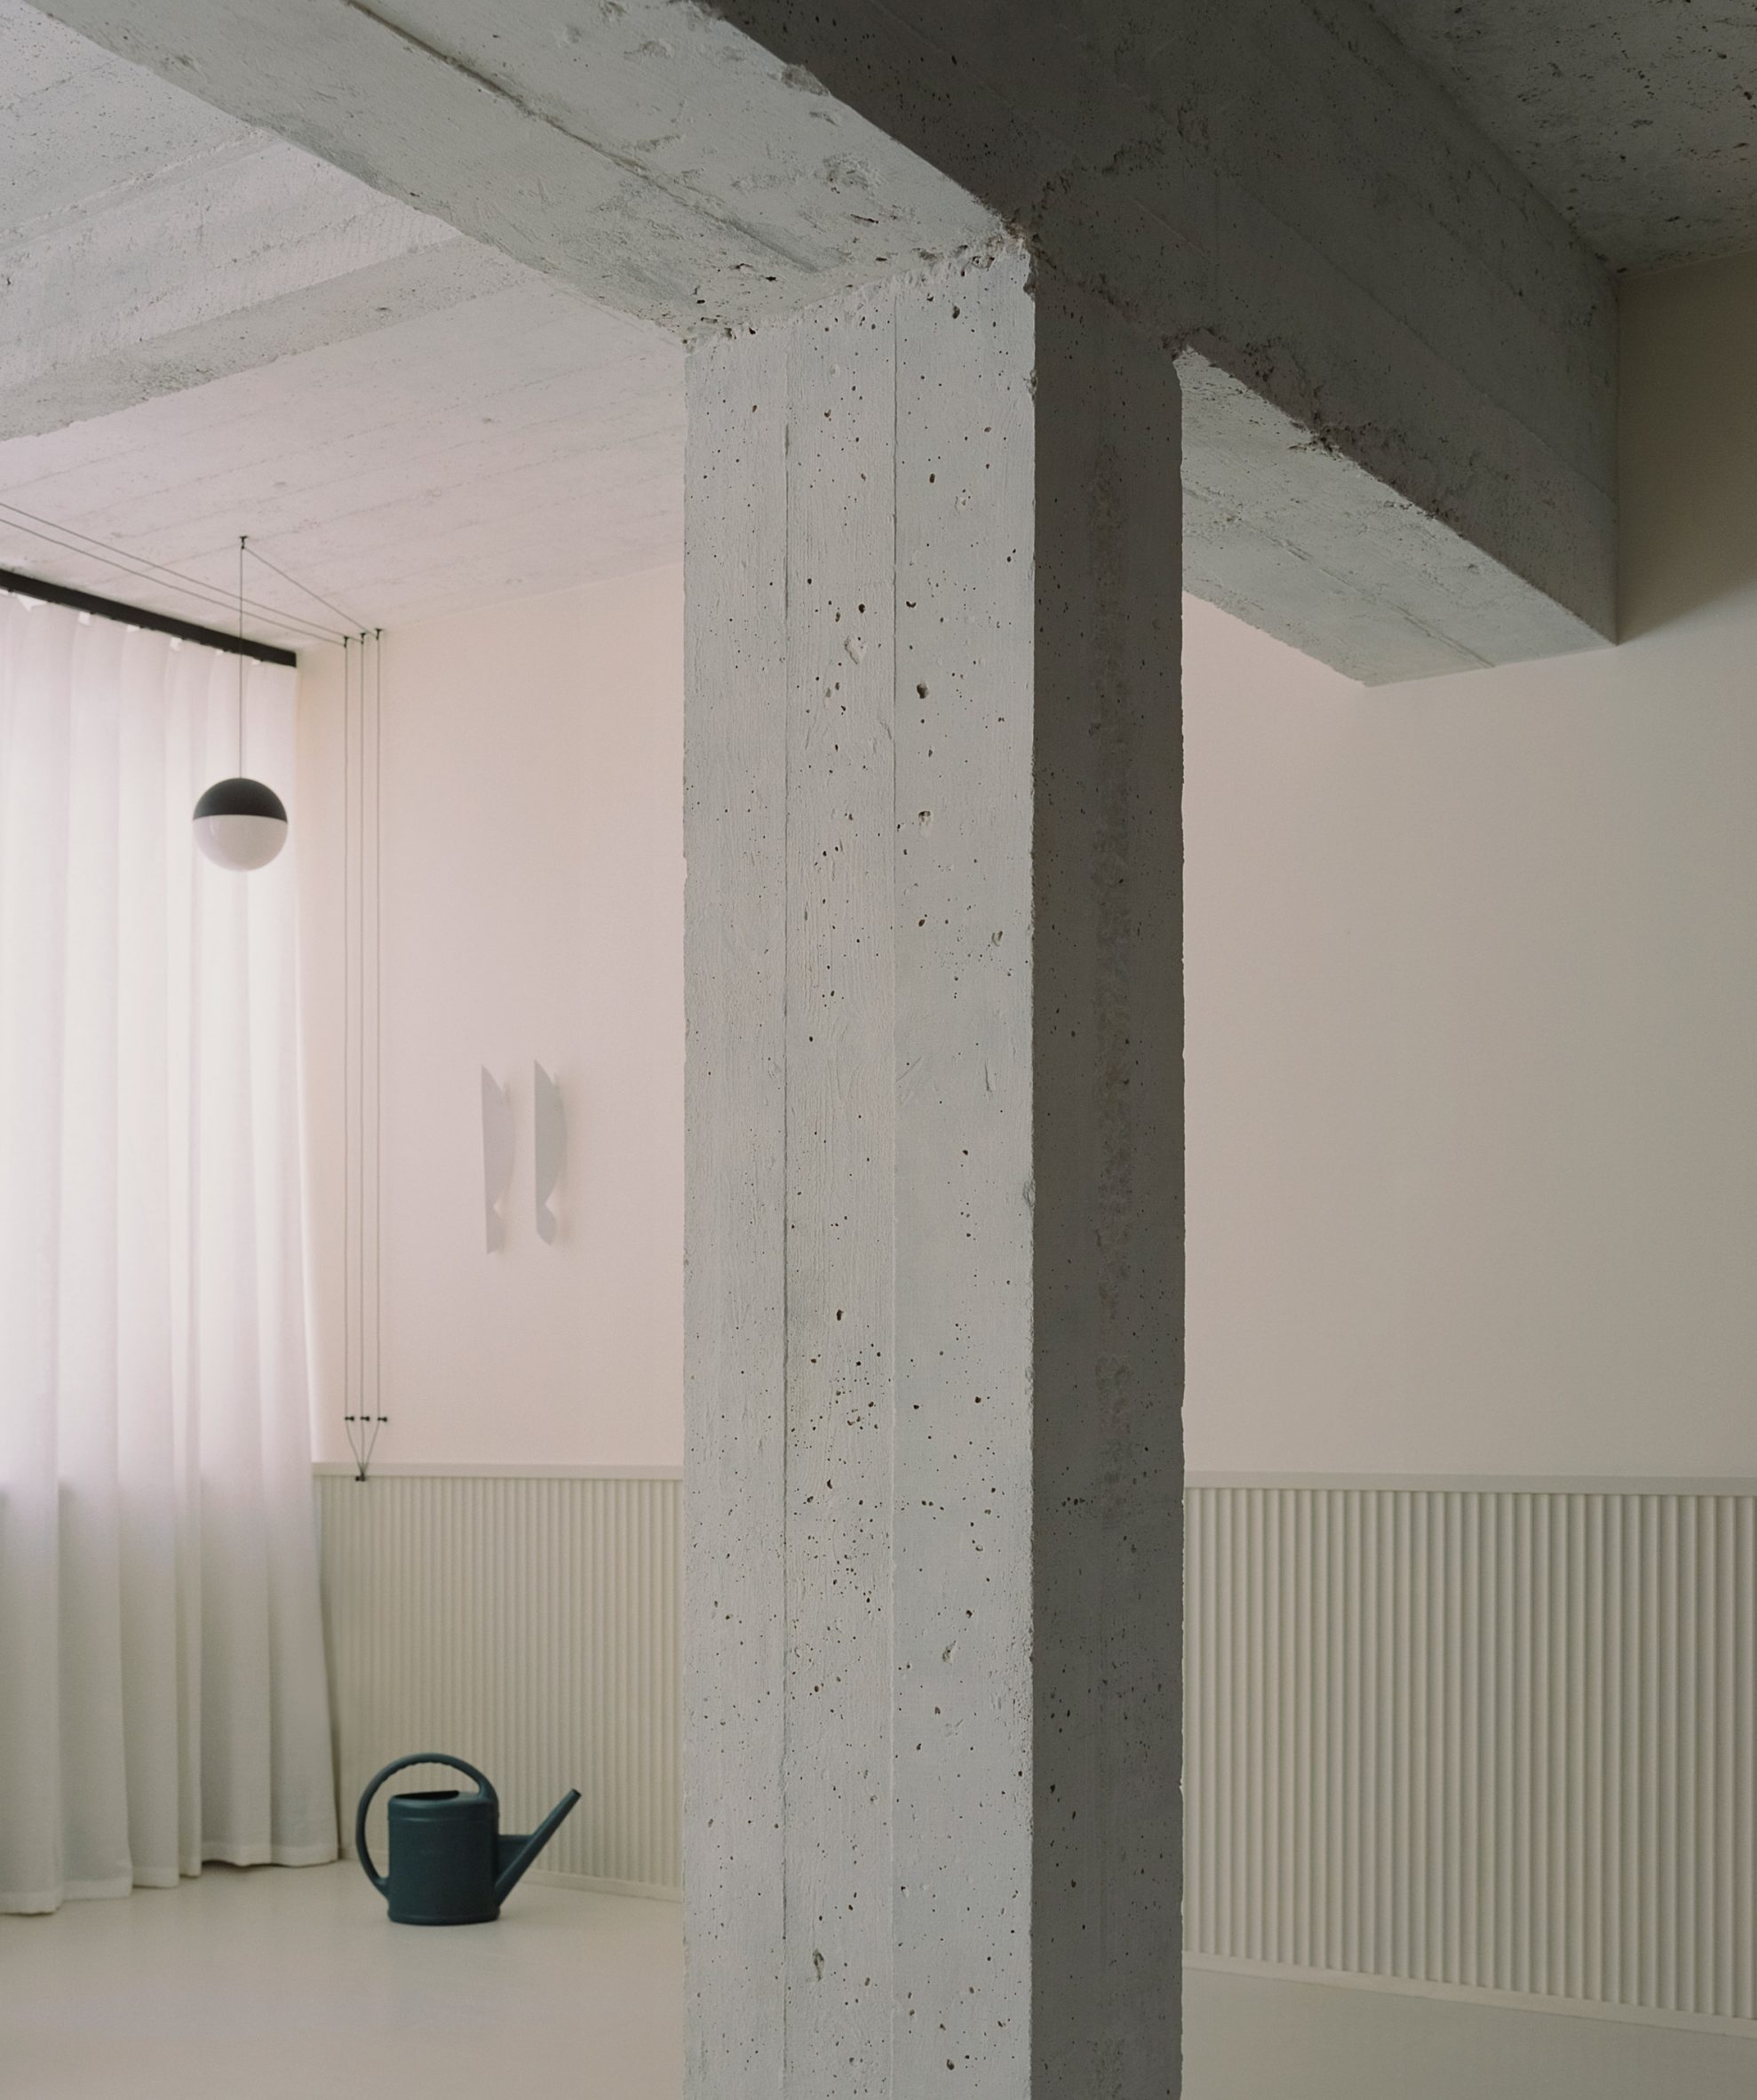 Concrete structural beams and column next to black watering can in The Whale apartment